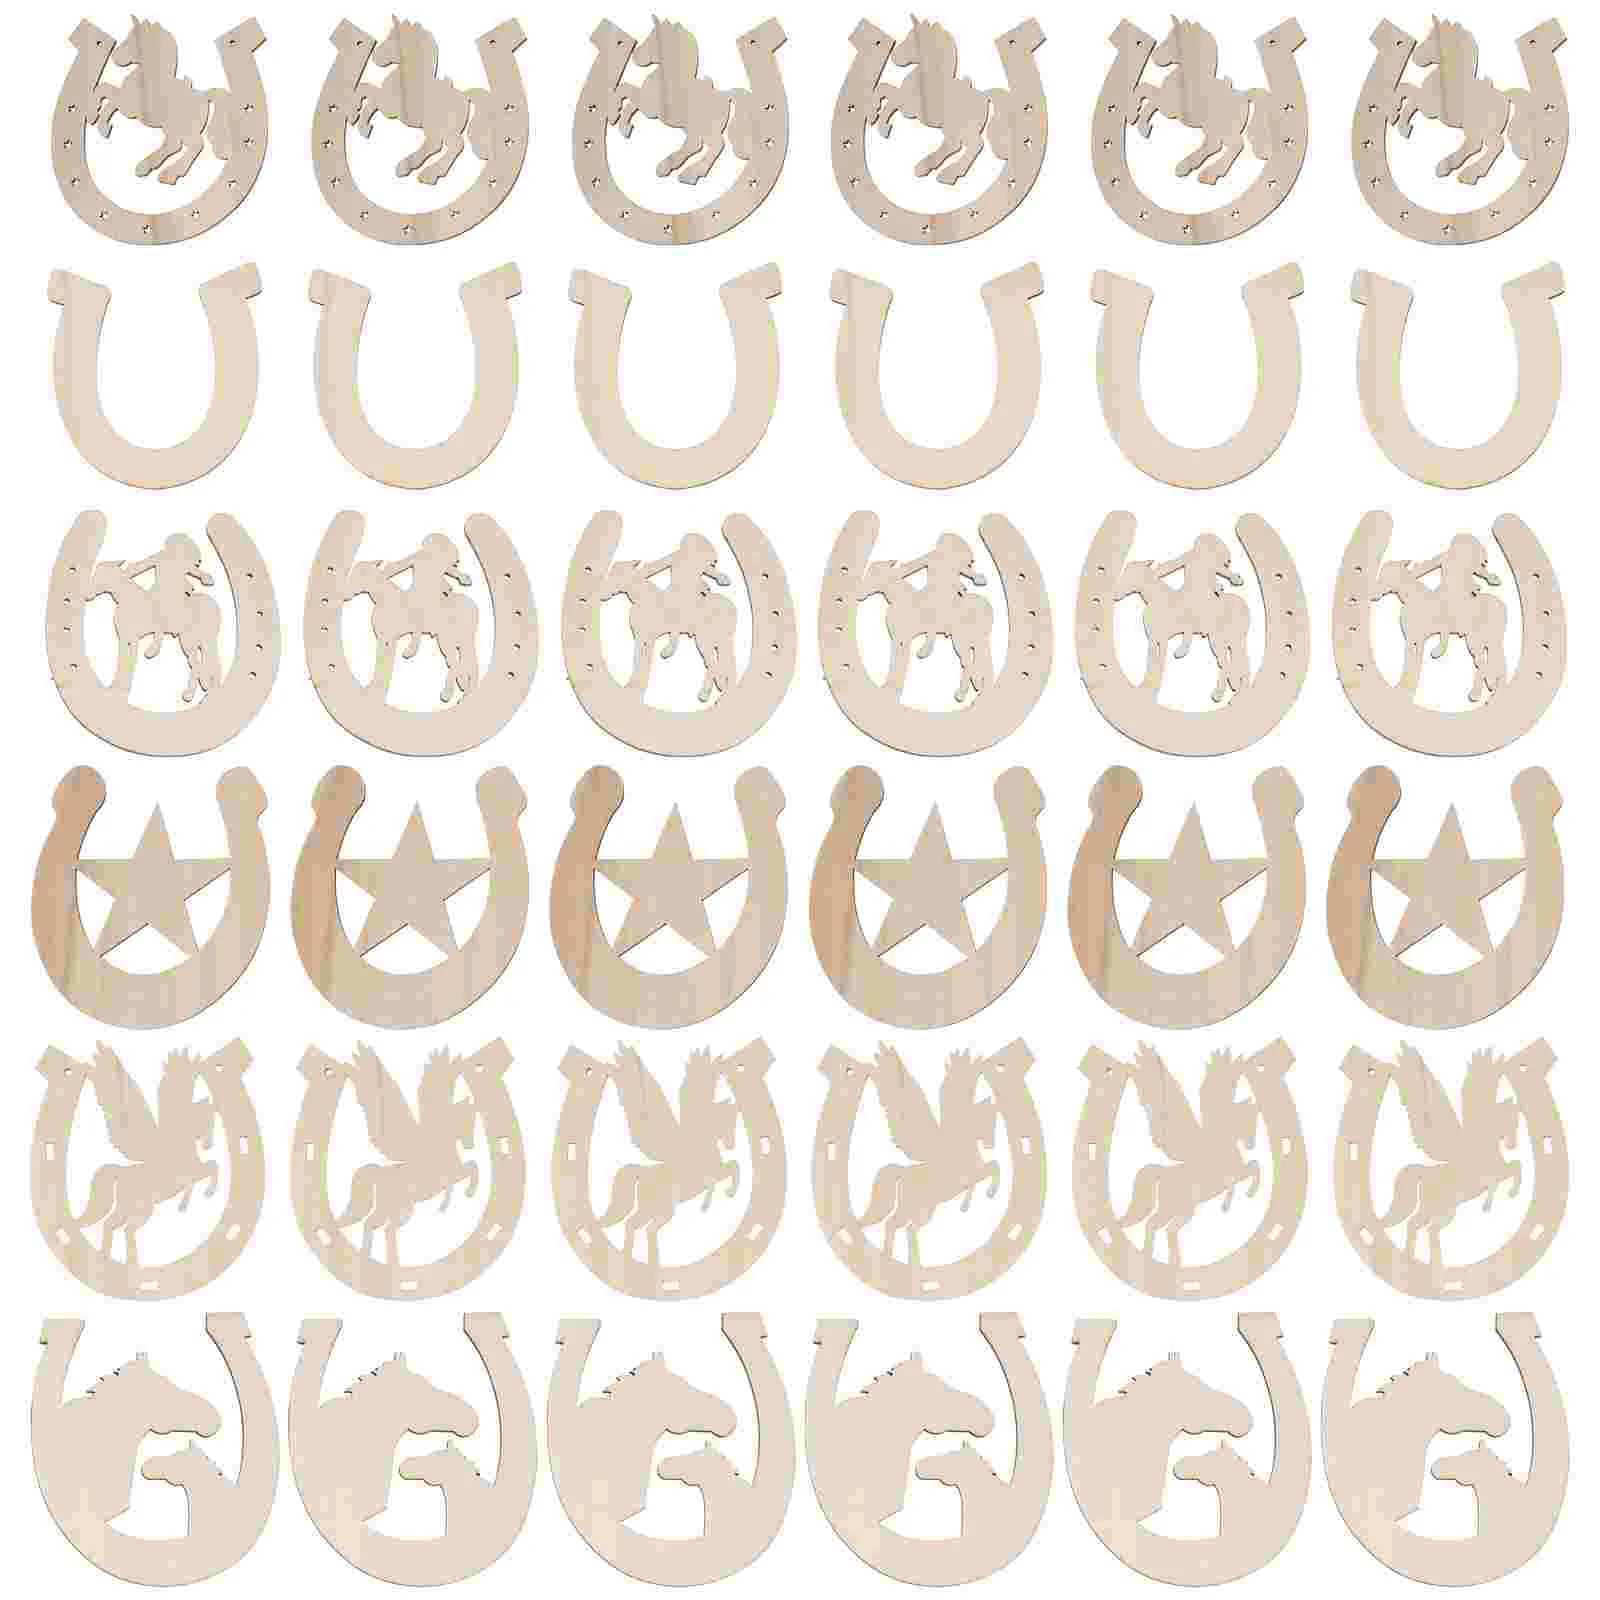 

Wood Horseshoe Wooden Unfinished Diy Slices Cutouts Graffiti Chips Craft Blank Pieces Supplieshorse Chip Cutout Decor Shaped